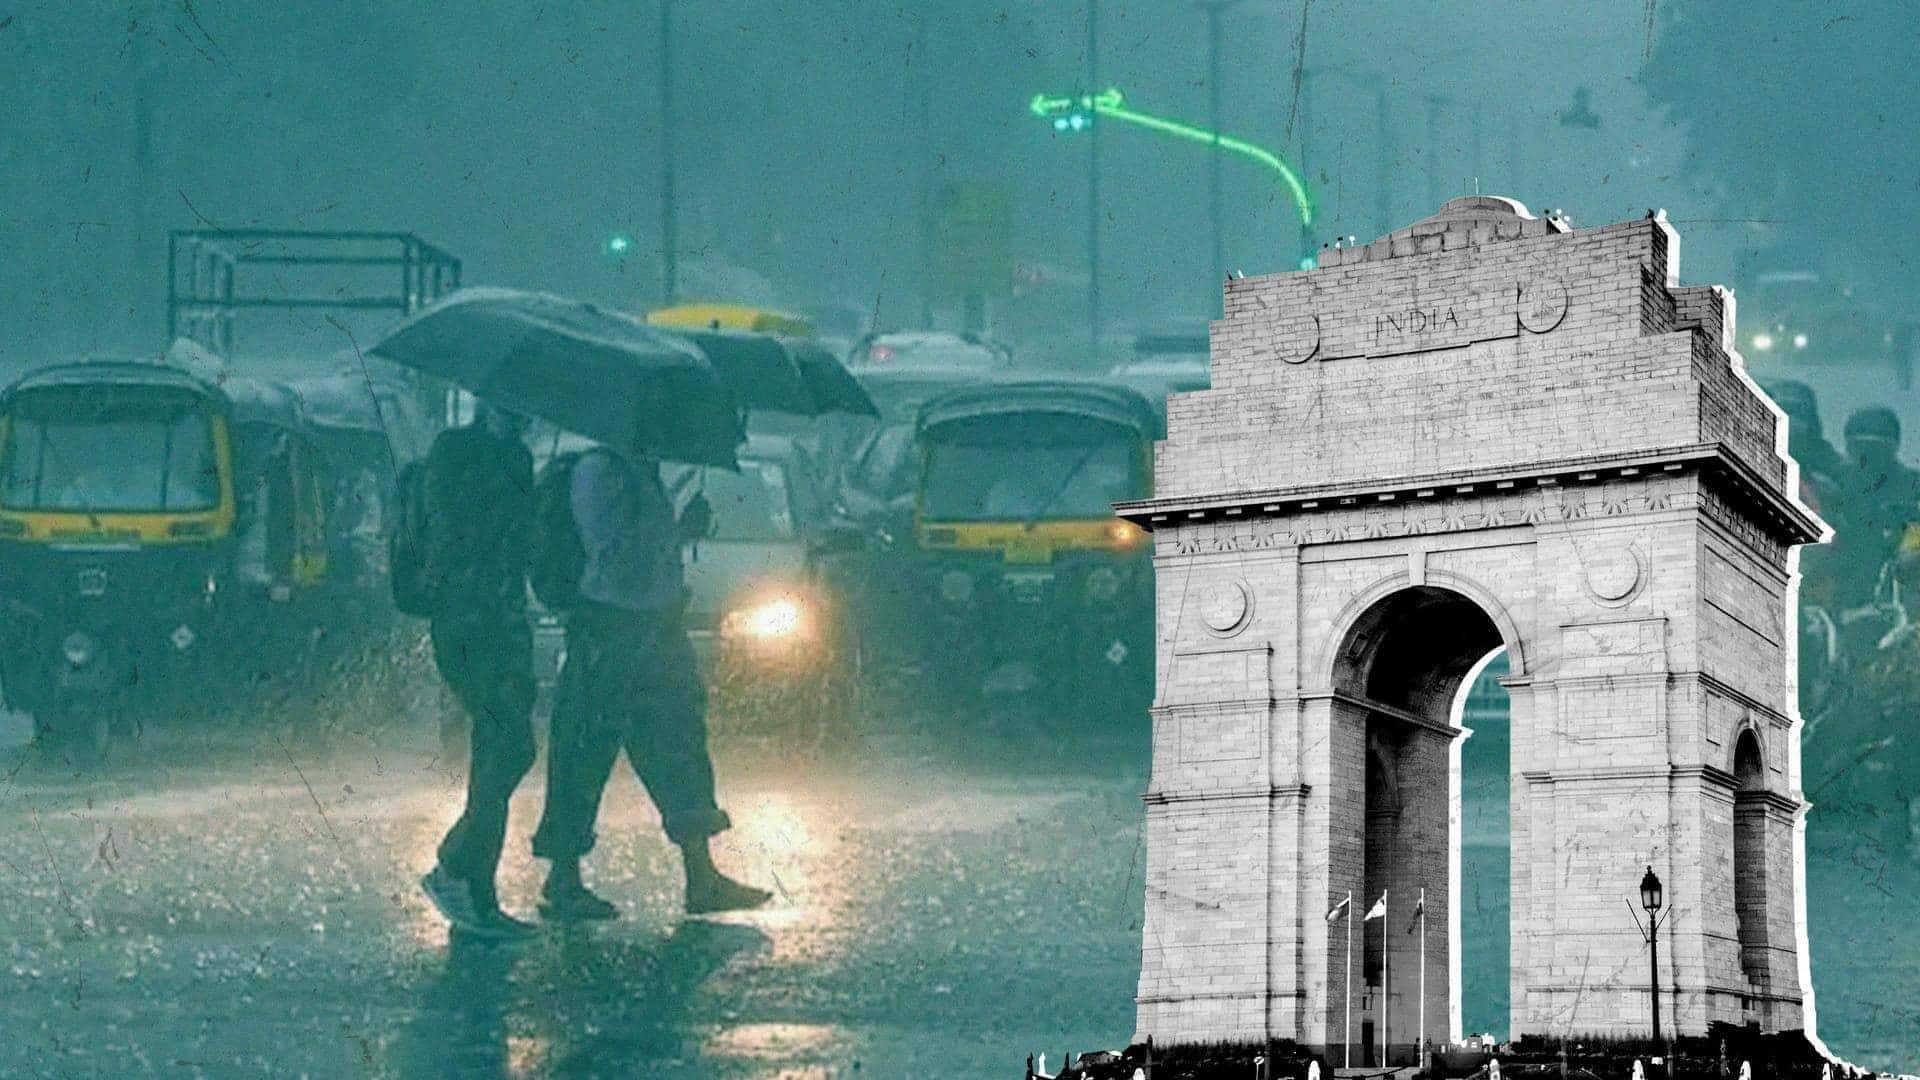 Delhi's wettest February in 10 years improves air quality